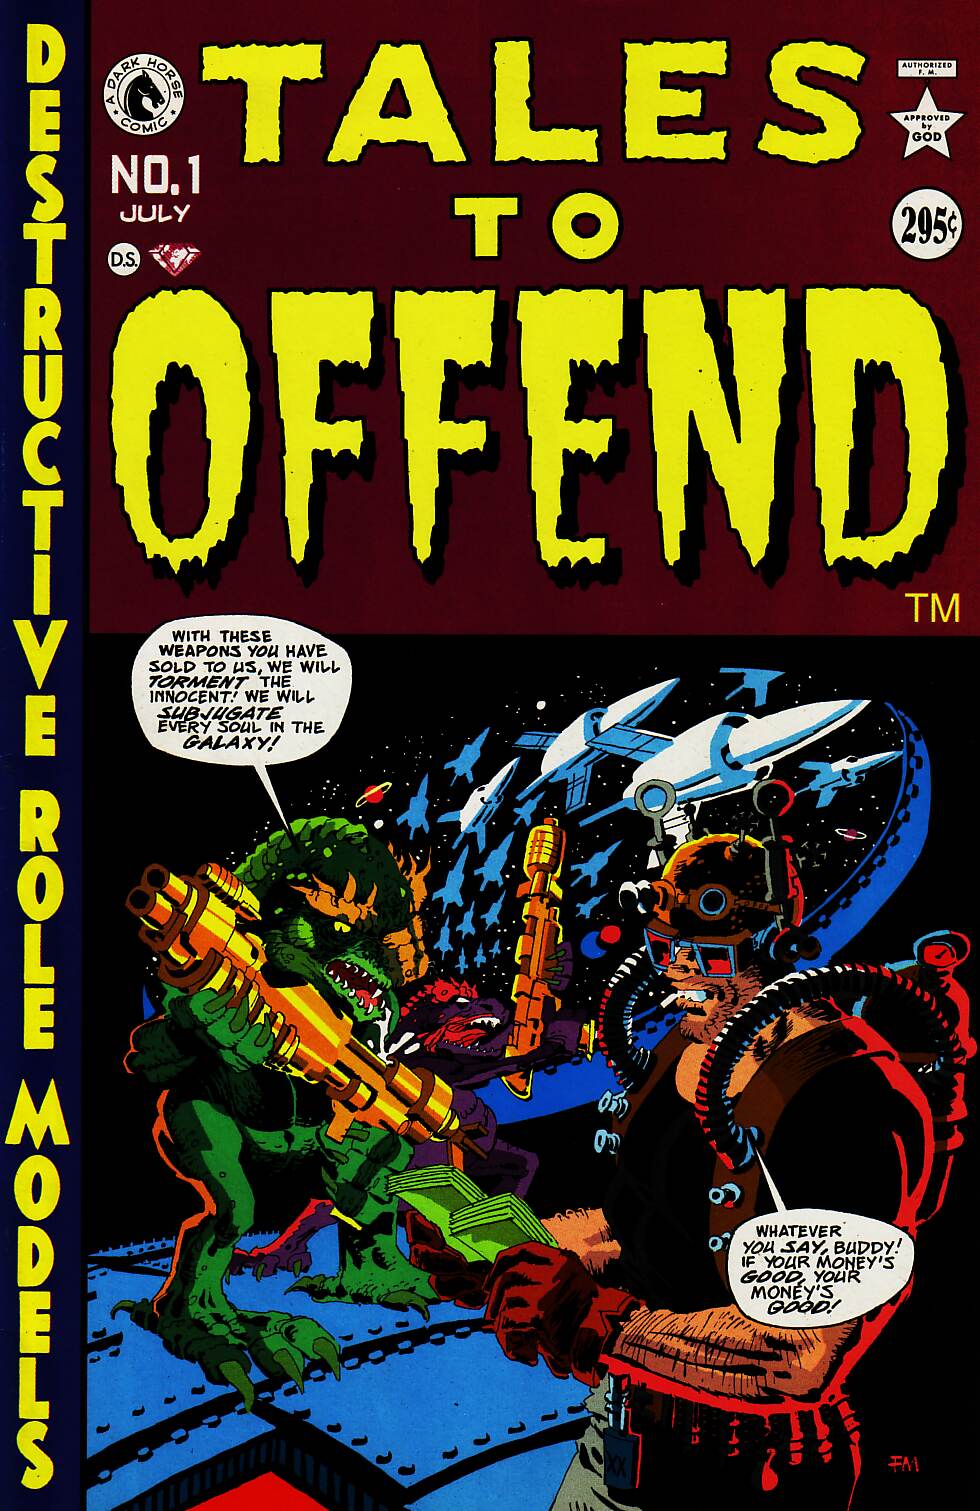 Read online Tales to Offend comic -  Issue # Full - 1